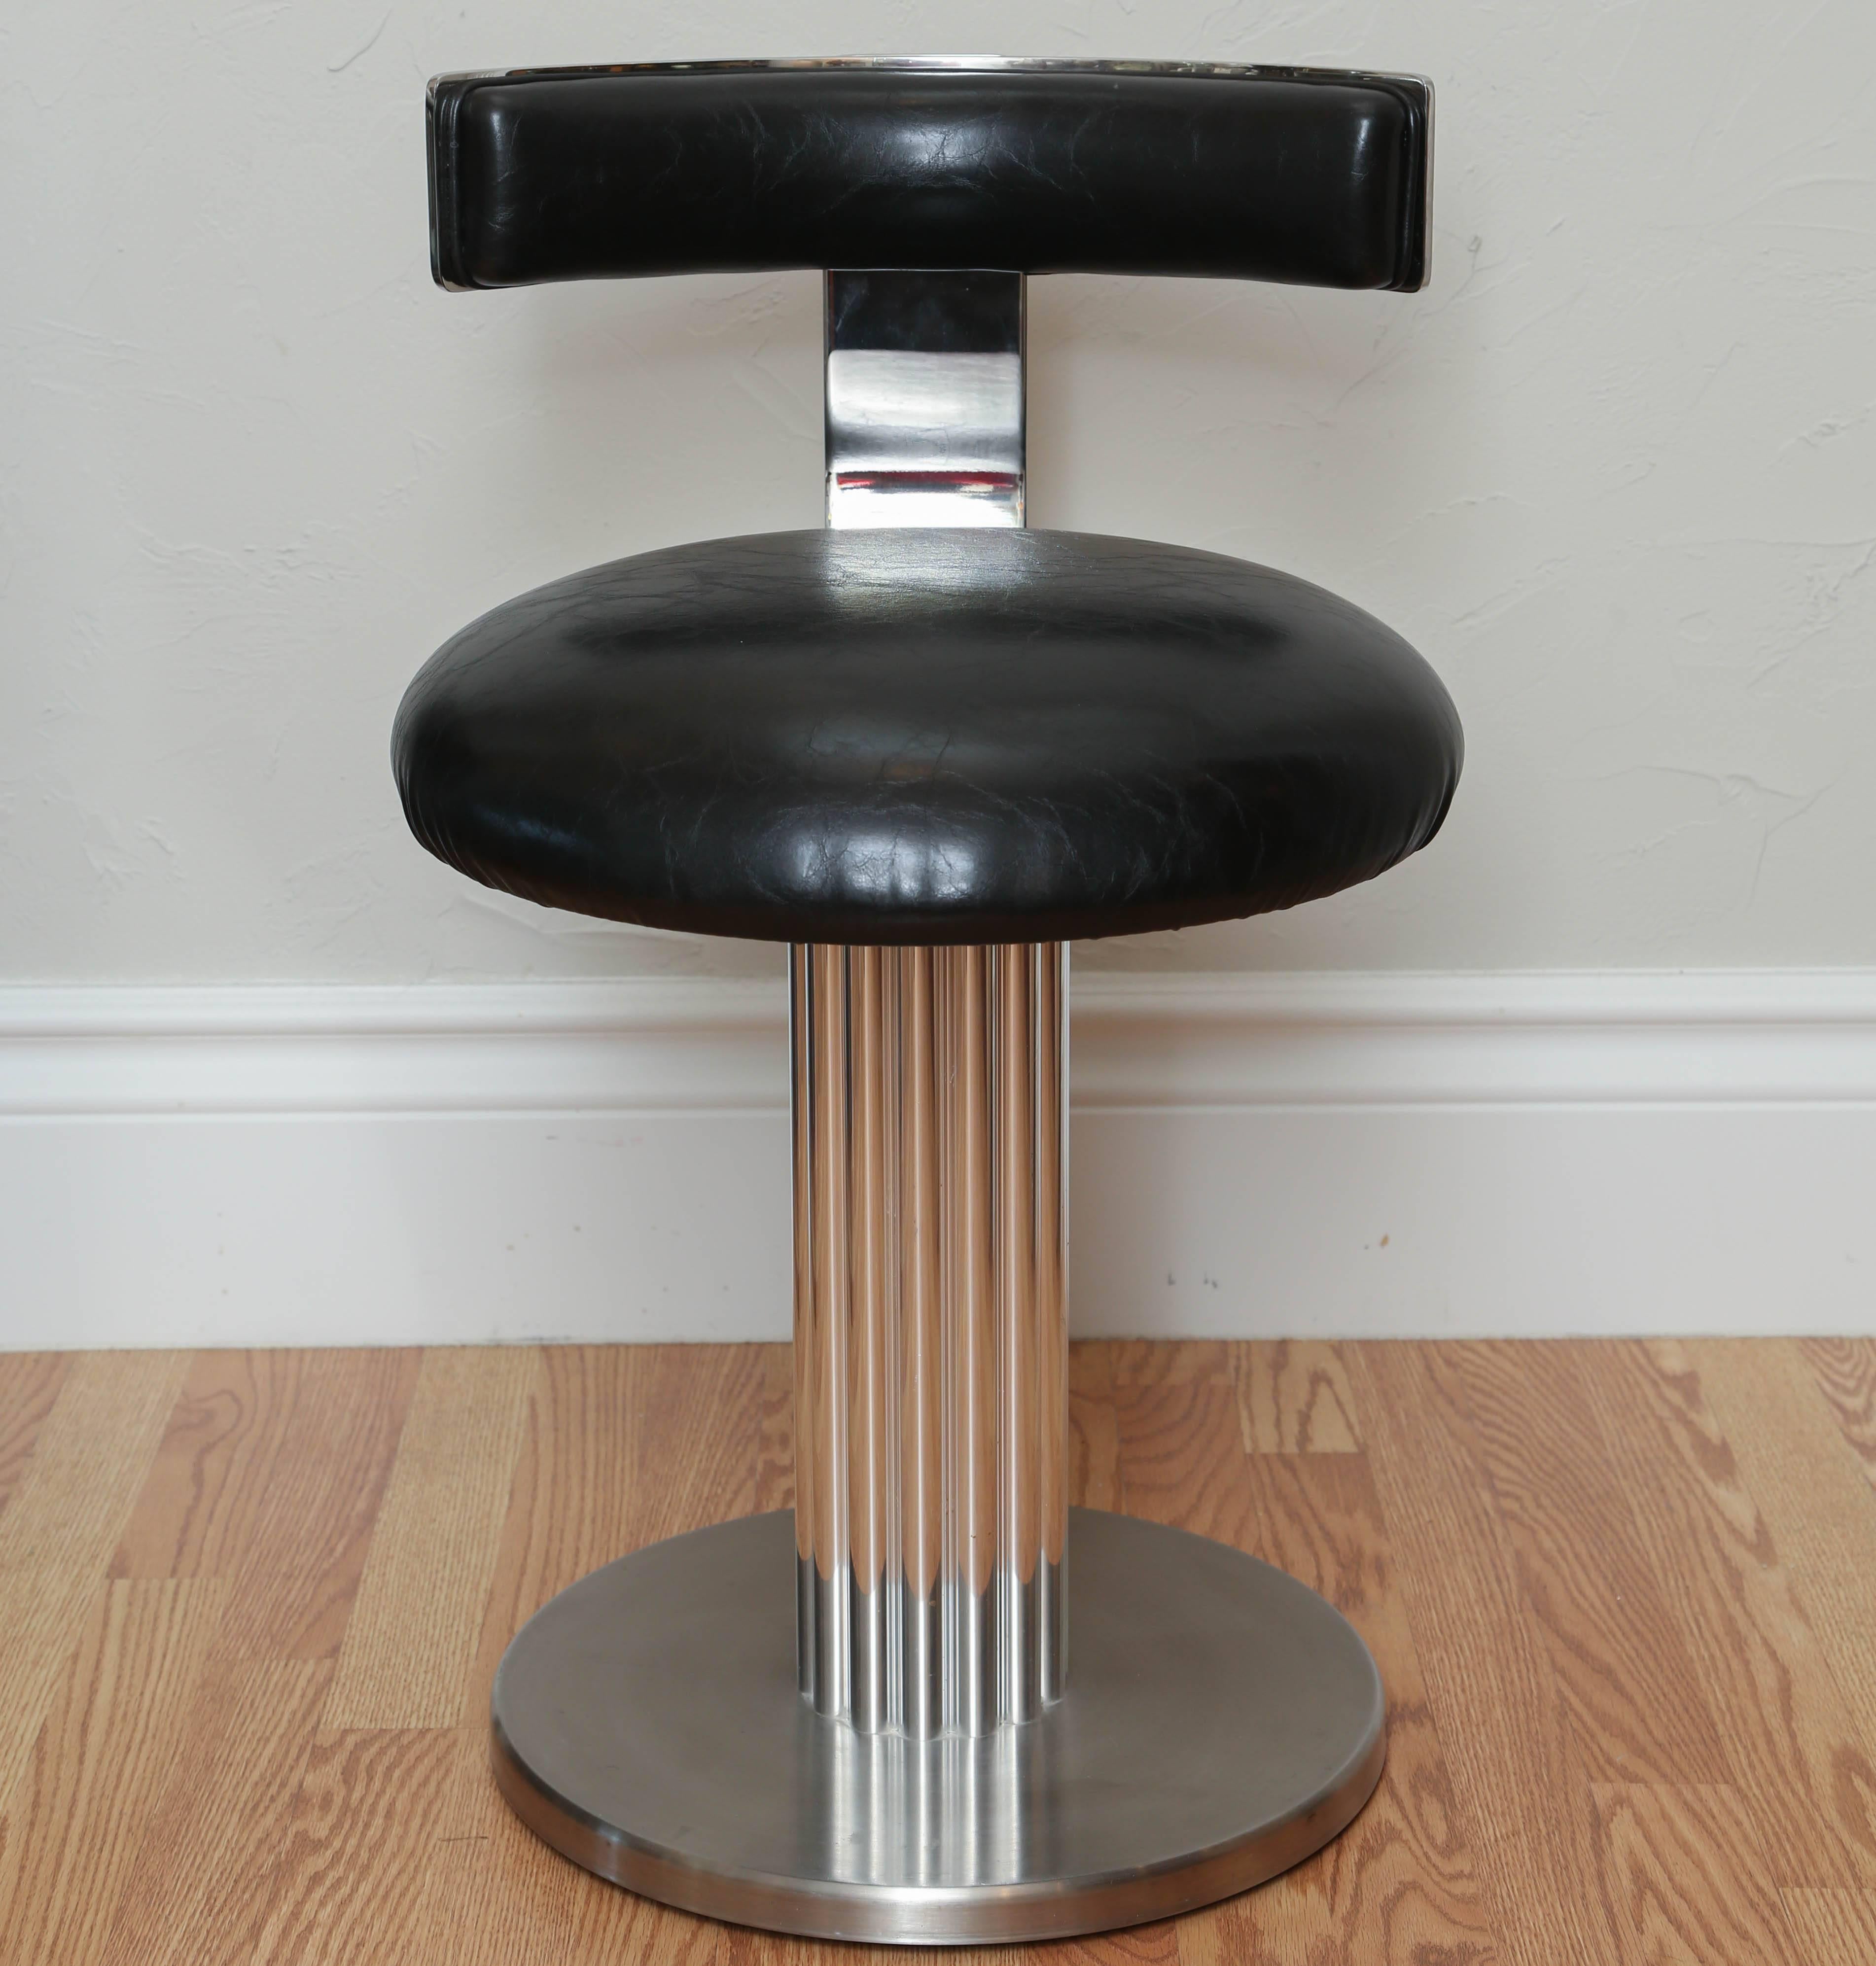 Pair of polished steel and chrome Art Deco style stools or swivel chairs with black leather seats and back.